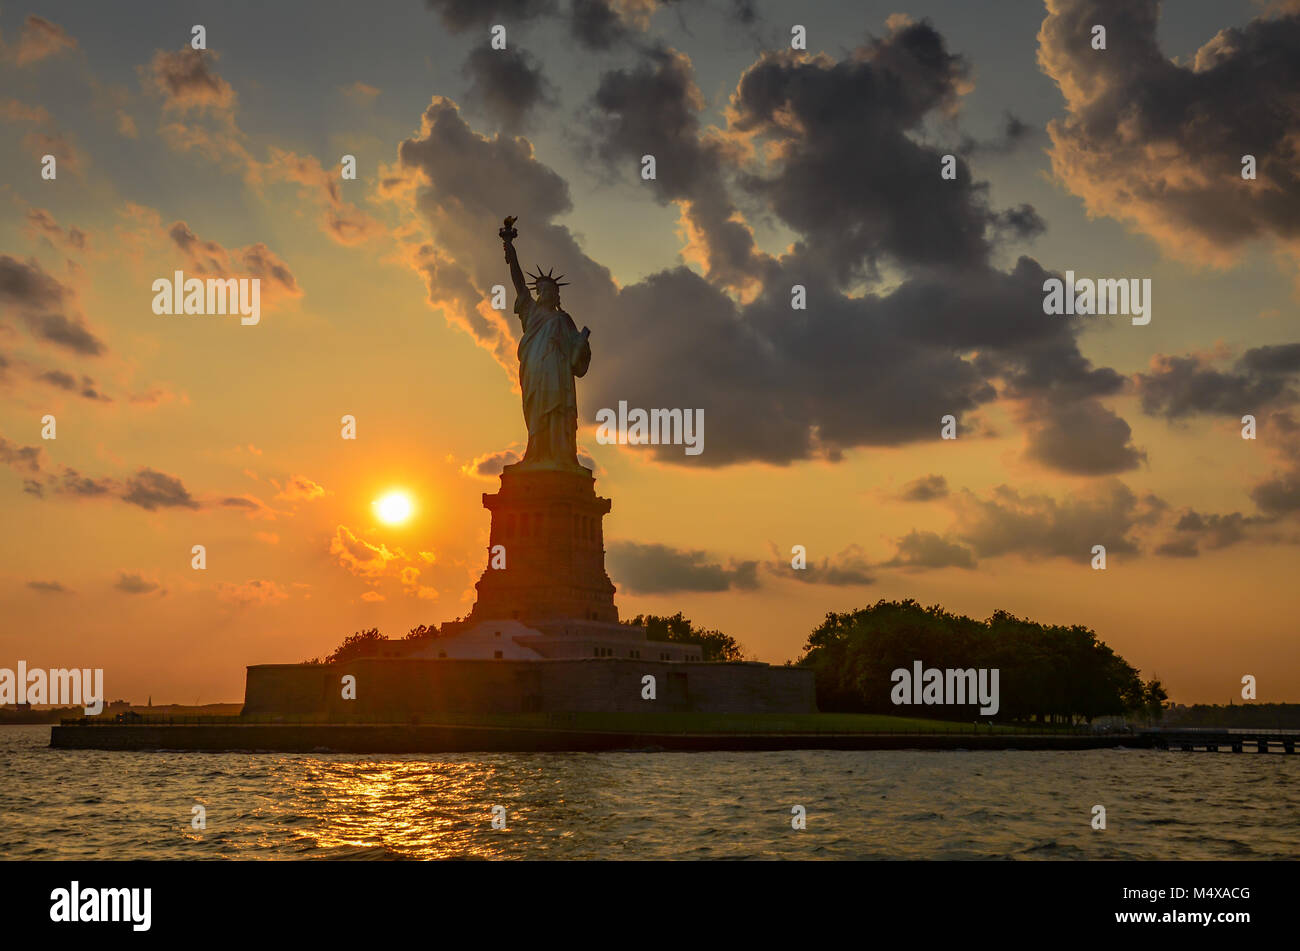 Setting sun paints a vivid and colorful sky behind the Statue of Liberty in New York City. Stock Photo